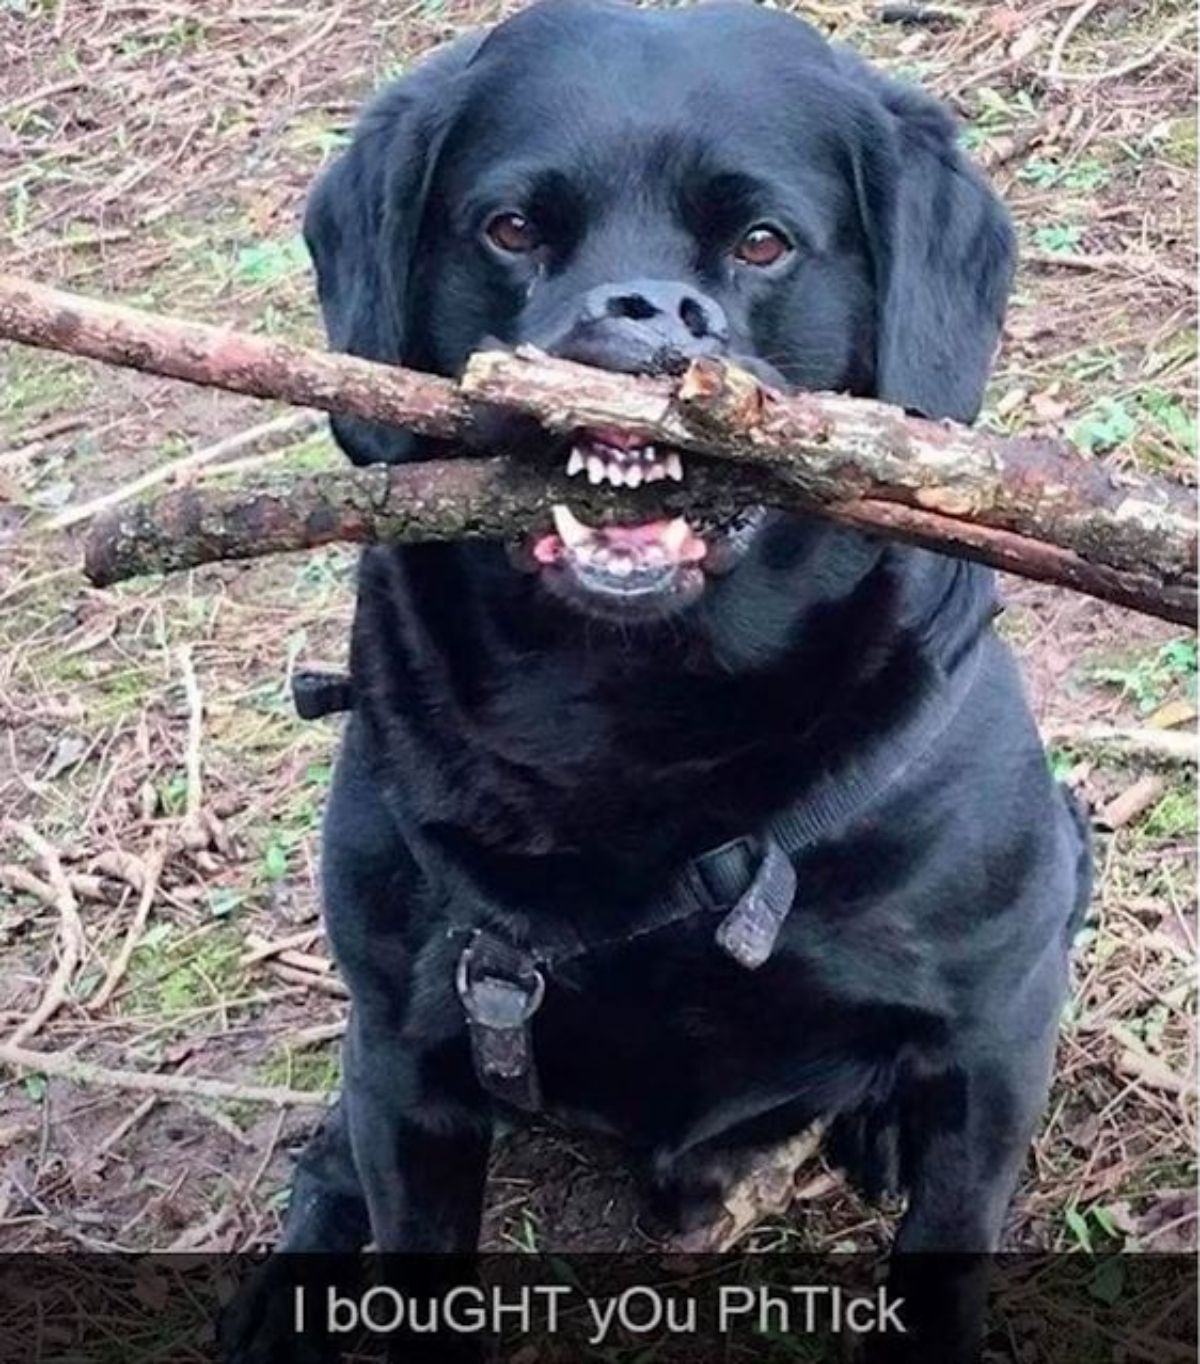 black labrador puppy with stick and smushed nose